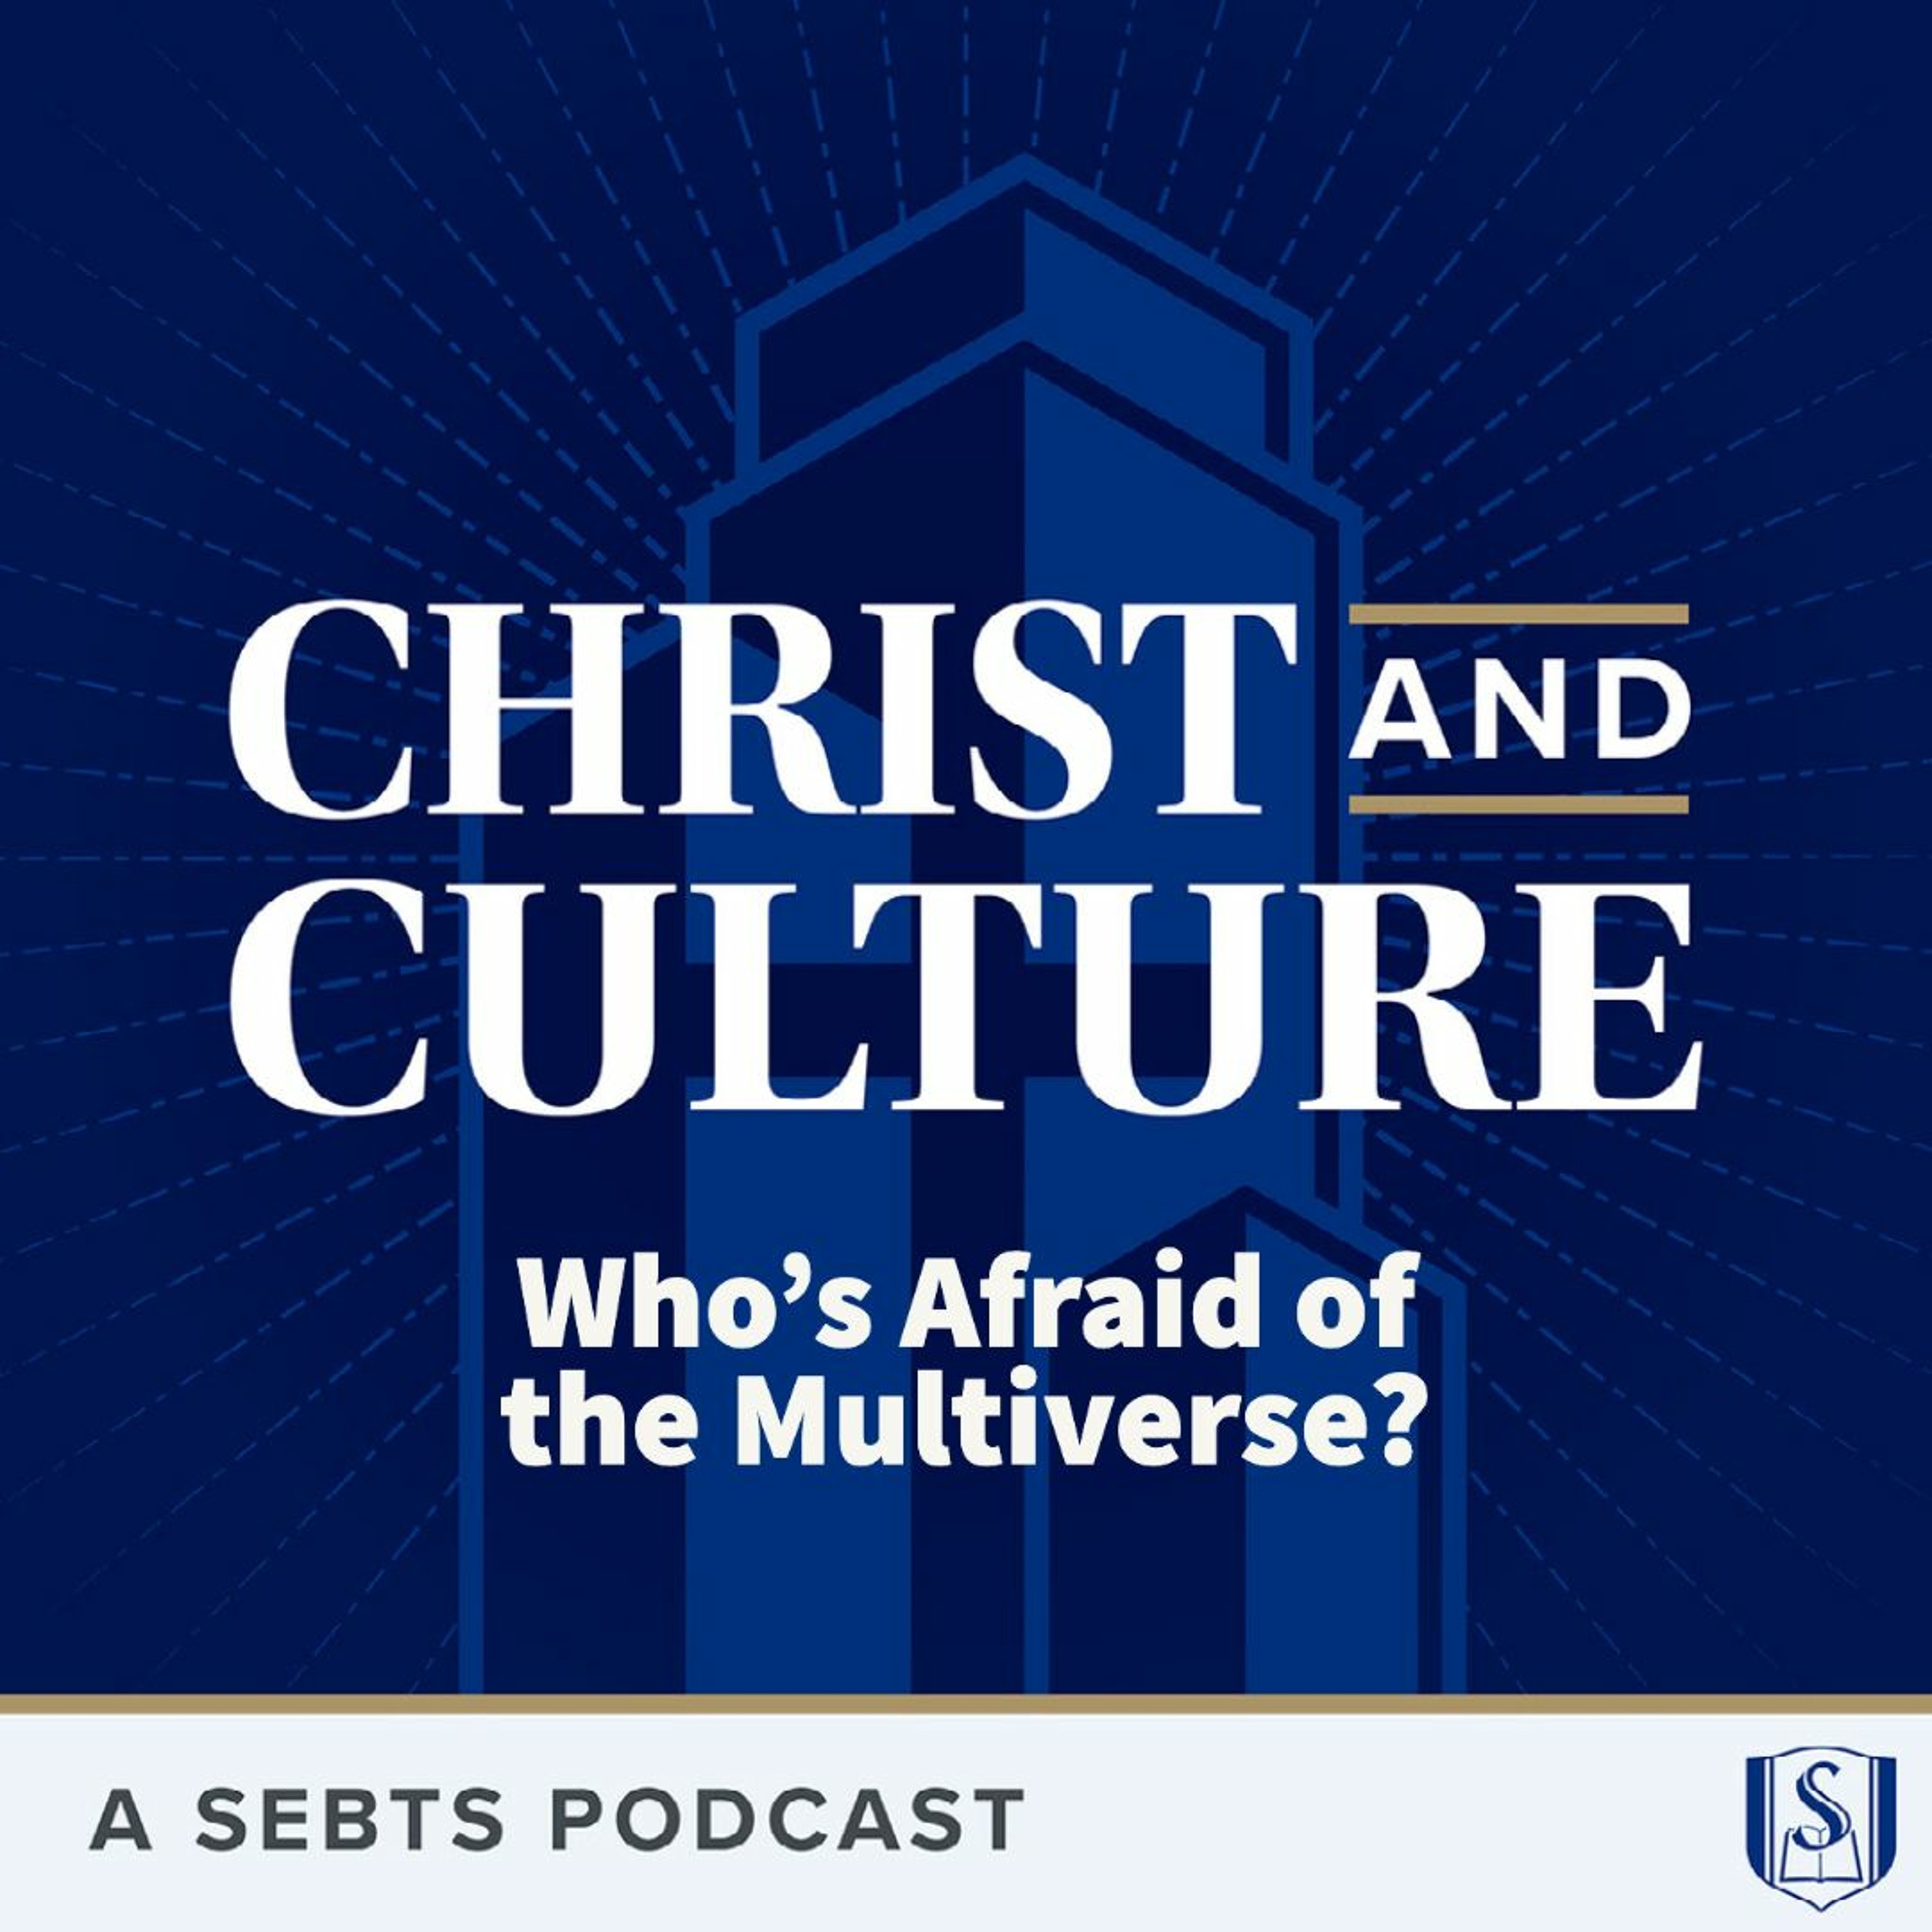 Jeff Zweerink: Who’s Afraid of the Multiverse? - EP 102